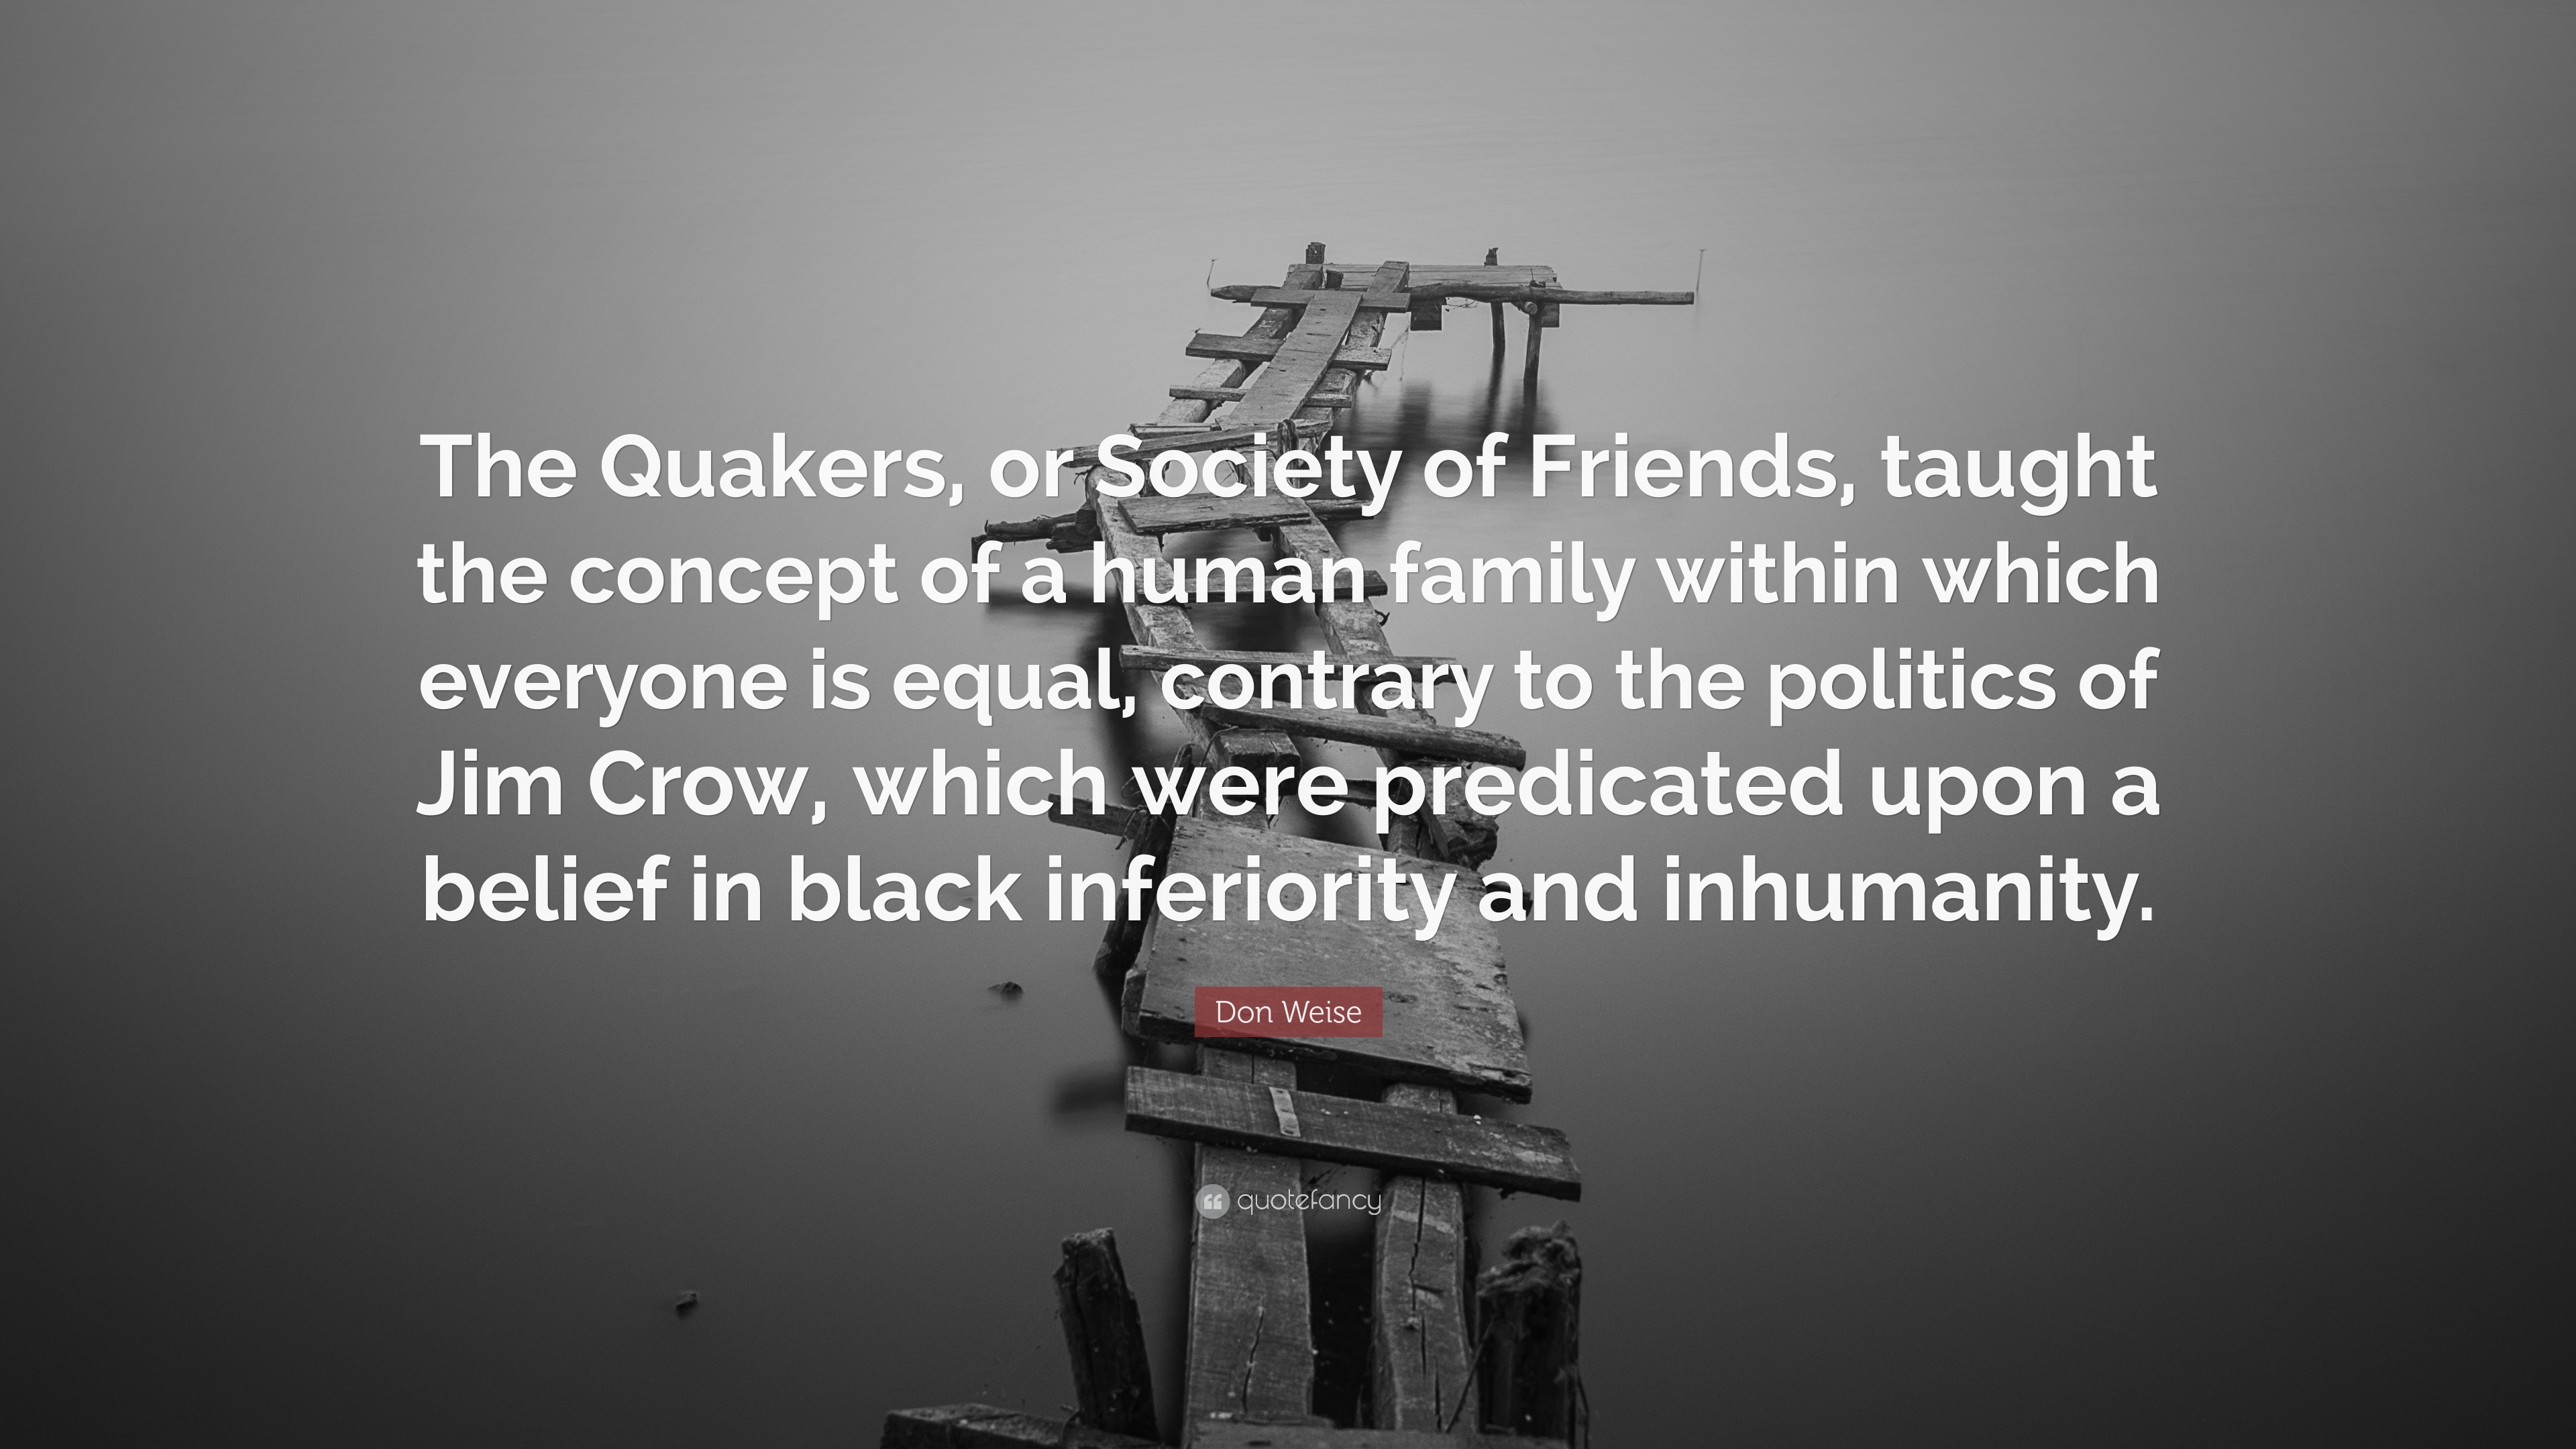 Don Quote: “The Quakers, or Society of taught the concept of a human within which everyone is equal, to the...”